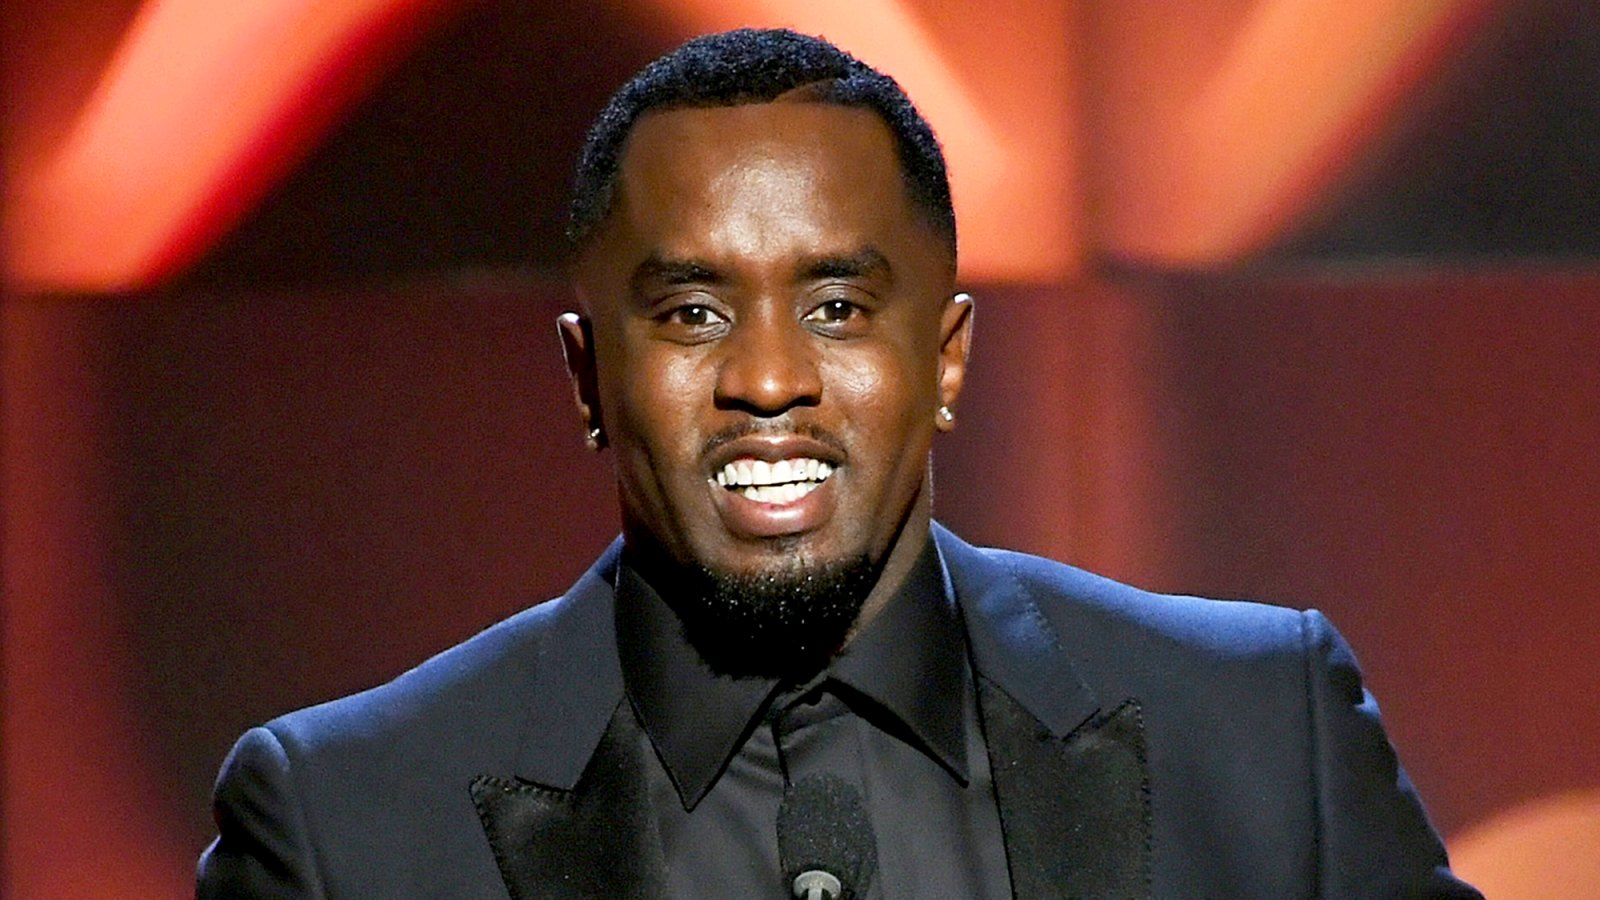 Diddy accepts the Hollywood Documentary Award for 'Can't Stop, Won't Stop: A Bad Boy Story' onstage during the 21st Annual Hollywood Film Awards at The Beverly Hilton Hotel on November 5, 2017 in Beverly Hills, California.